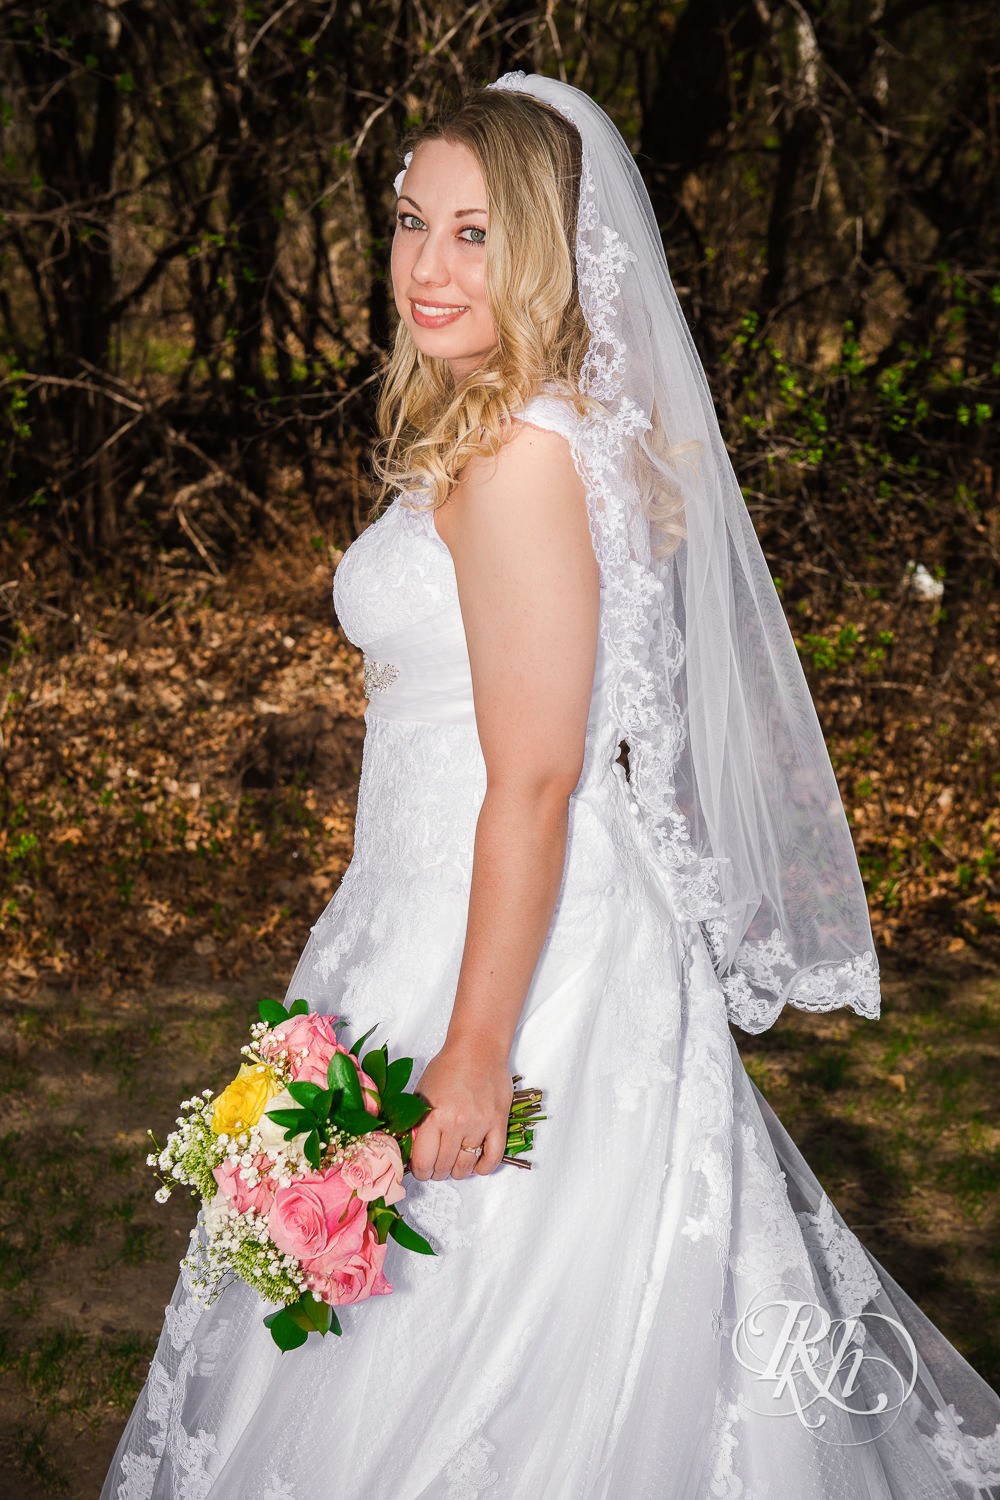 Bride smiles during at North Metro Event Center wedding in Shoreview, Minnesota.